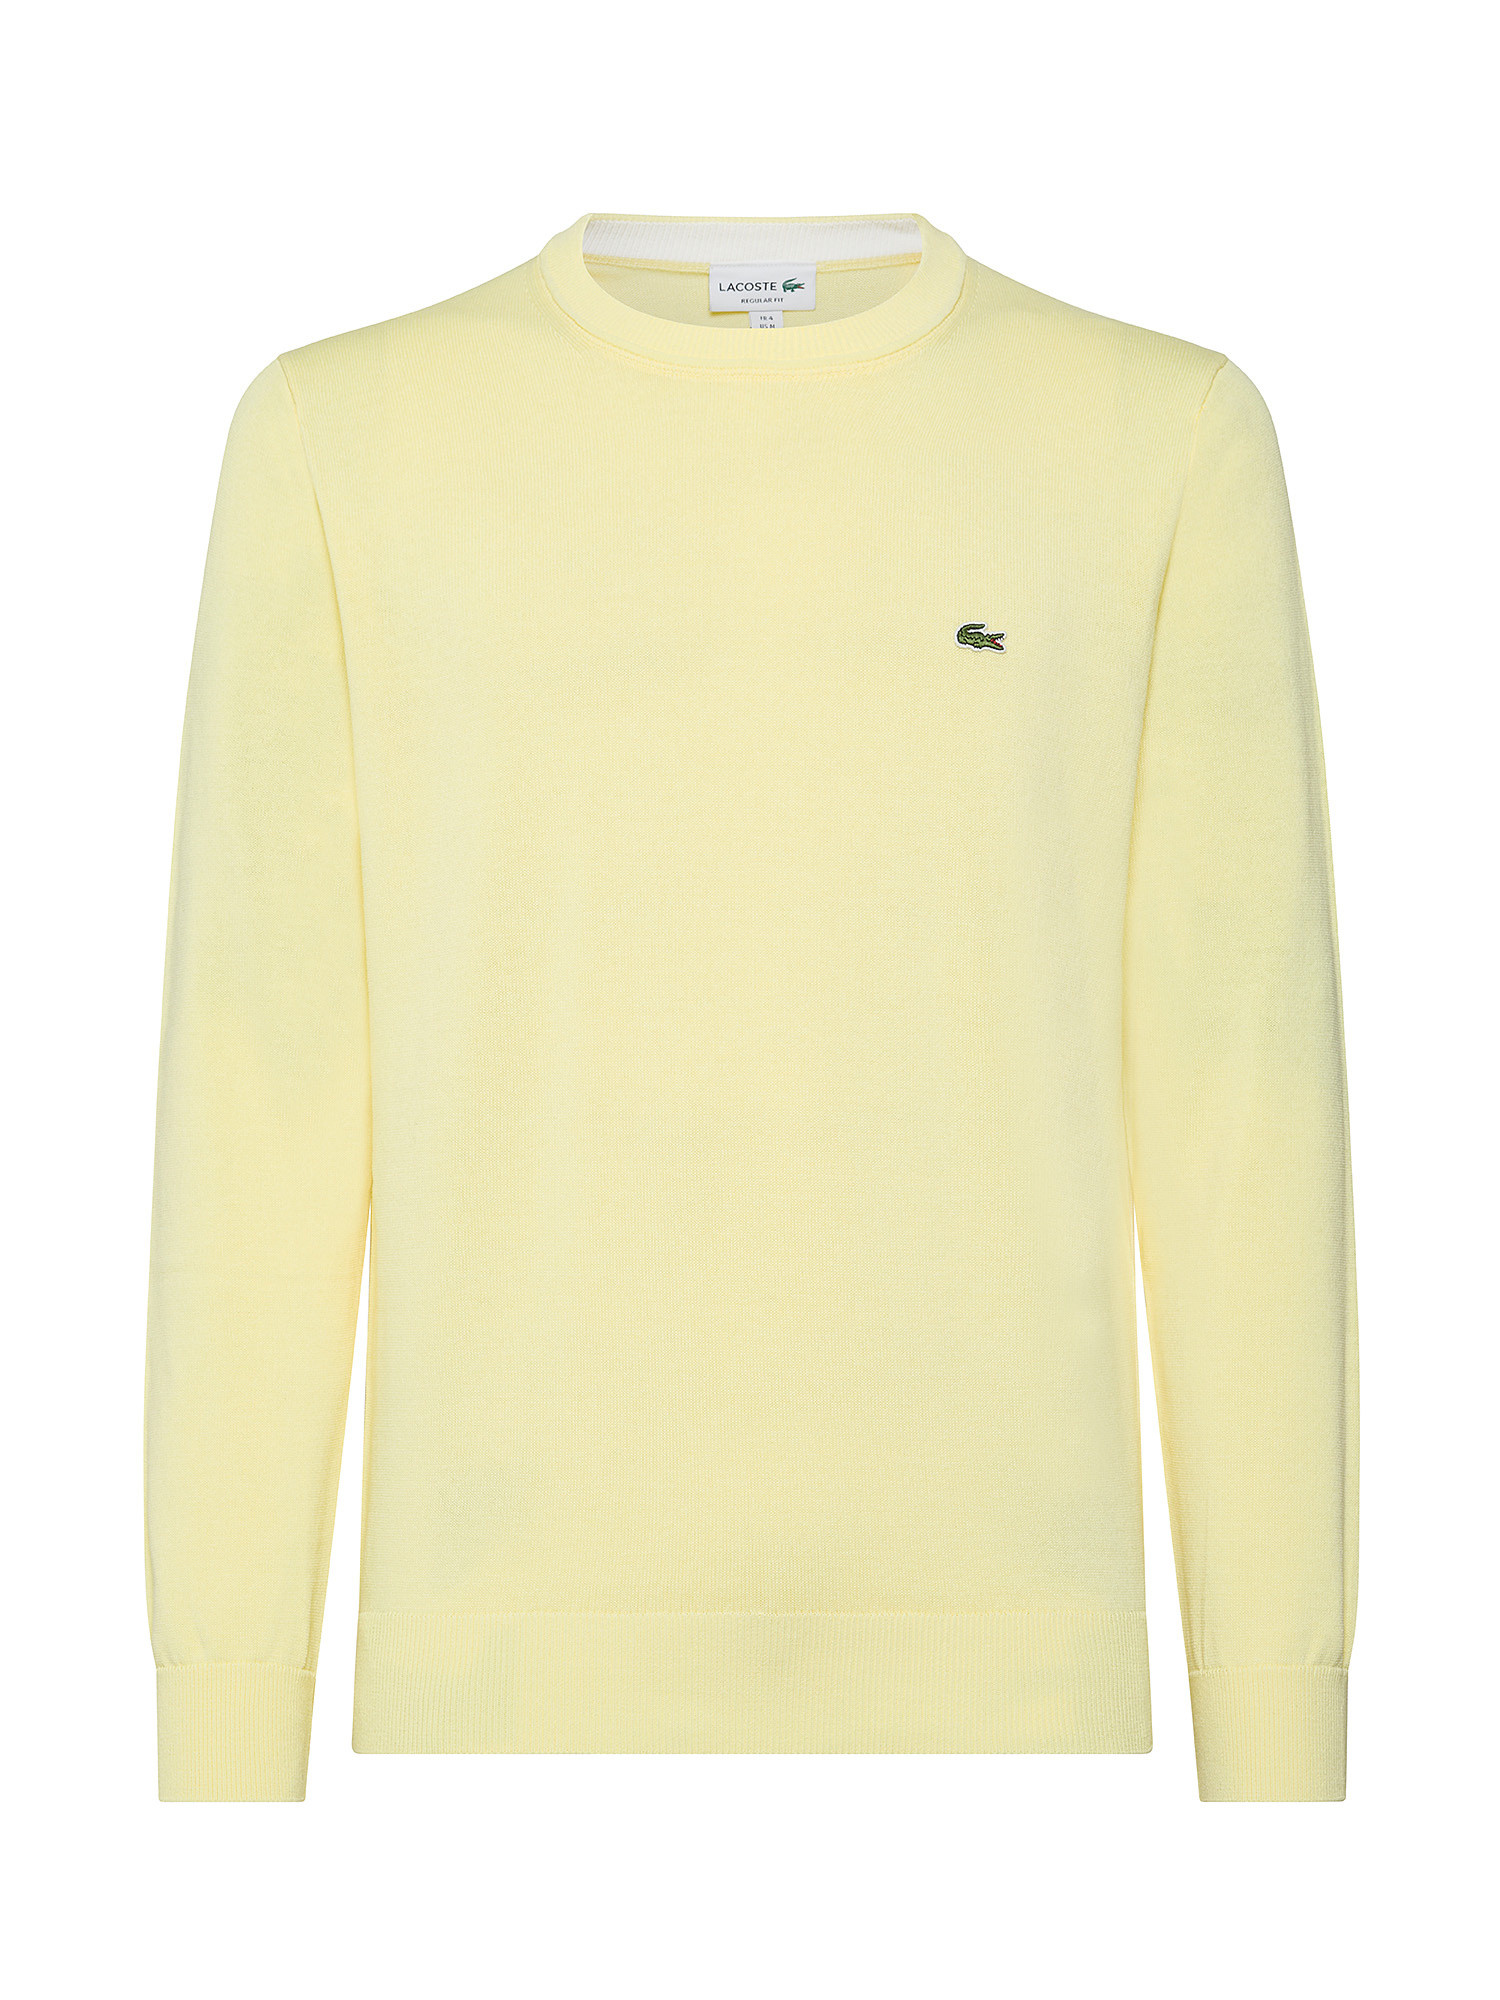 Lacoste - Cotton crewneck sweater, Yellow, large image number 0